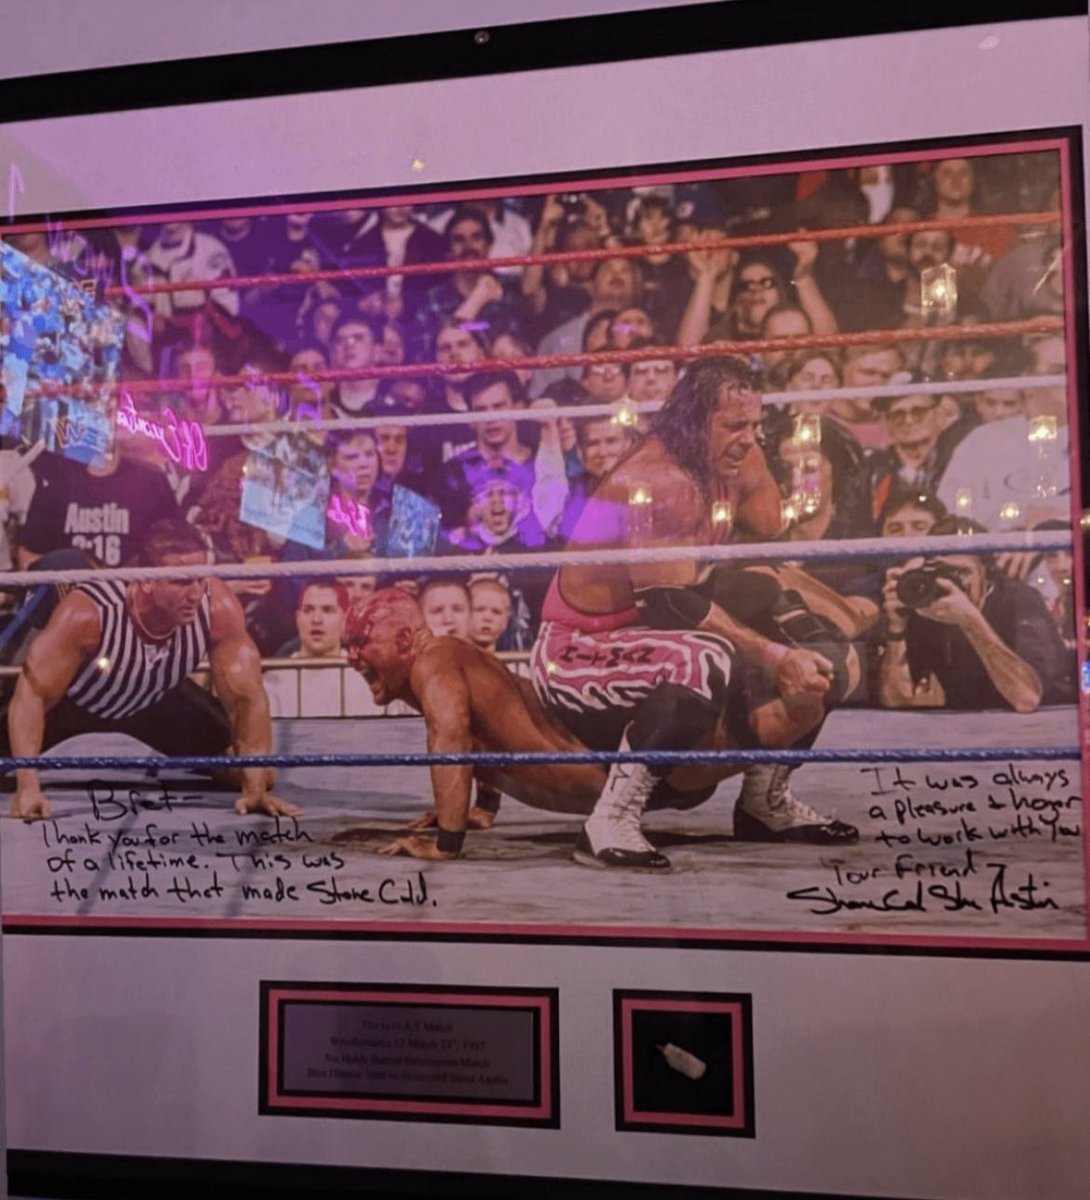 Stone Cold Steve Austin gifted Bret Hart a framed photo of thier Wrestlemania match. Along with the blade he used 💯